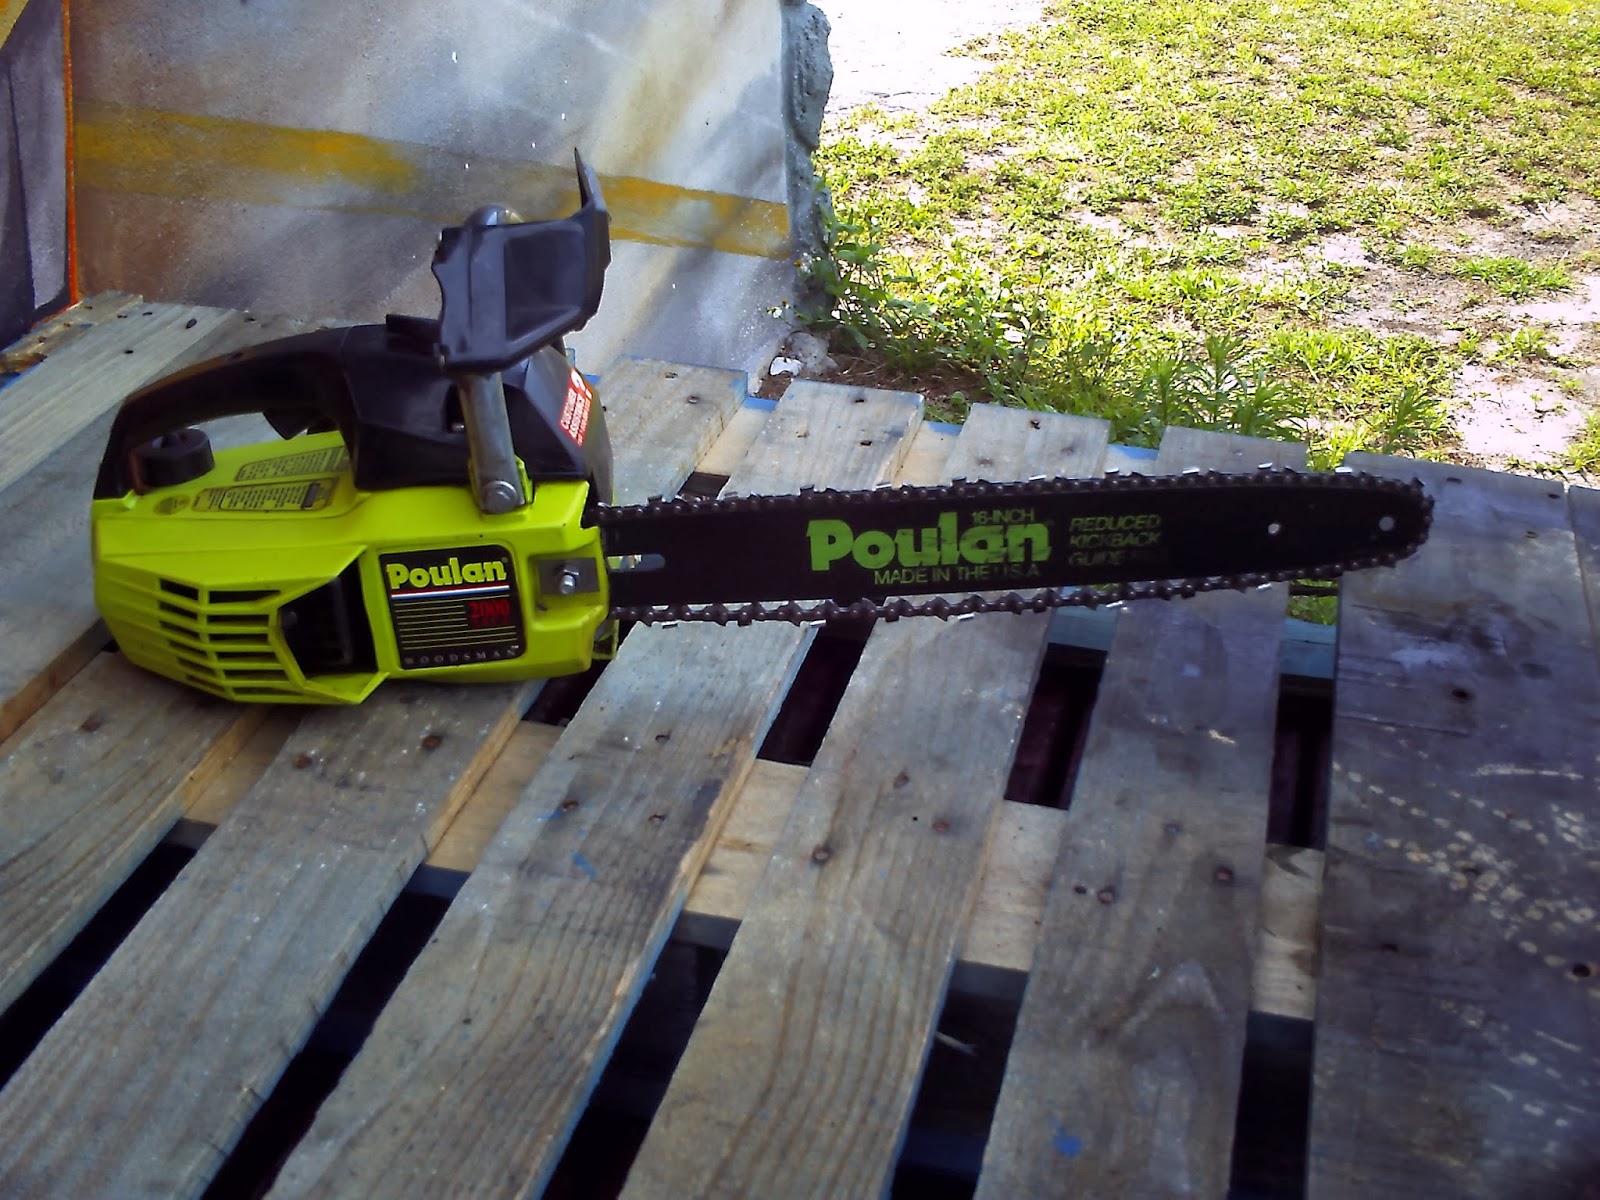 Terry's Small Engine Repair !: Poulan 2000 " Woodsman " Chainsaw - $ 125.00